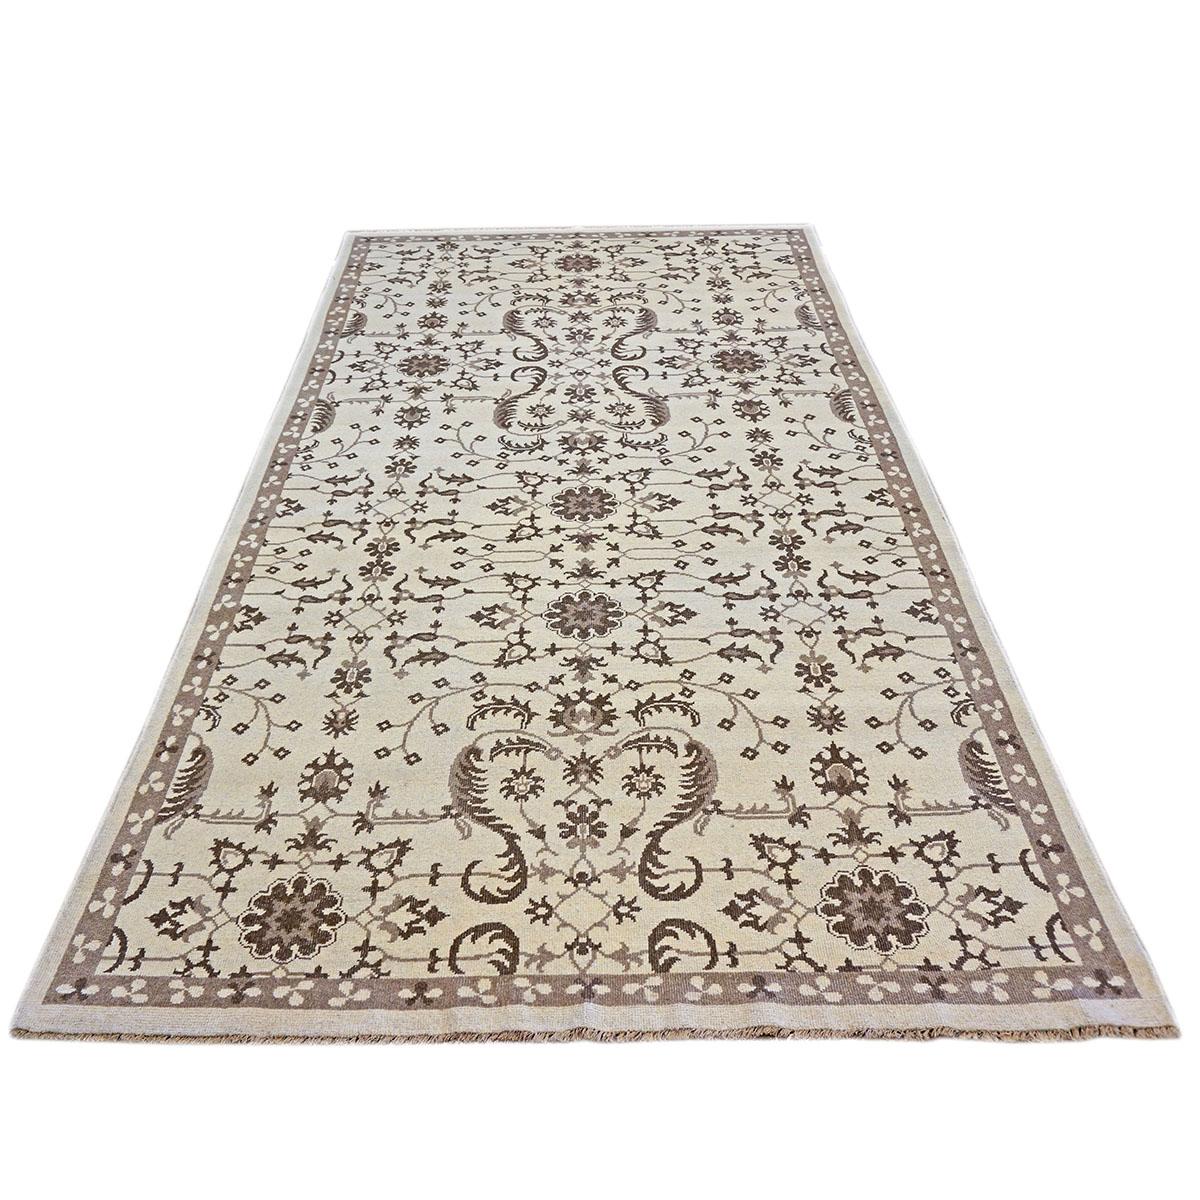 Afghan 21st Century Sultanabad 6x10 Ivory & Brown Handmade Area Whool Rug For Sale